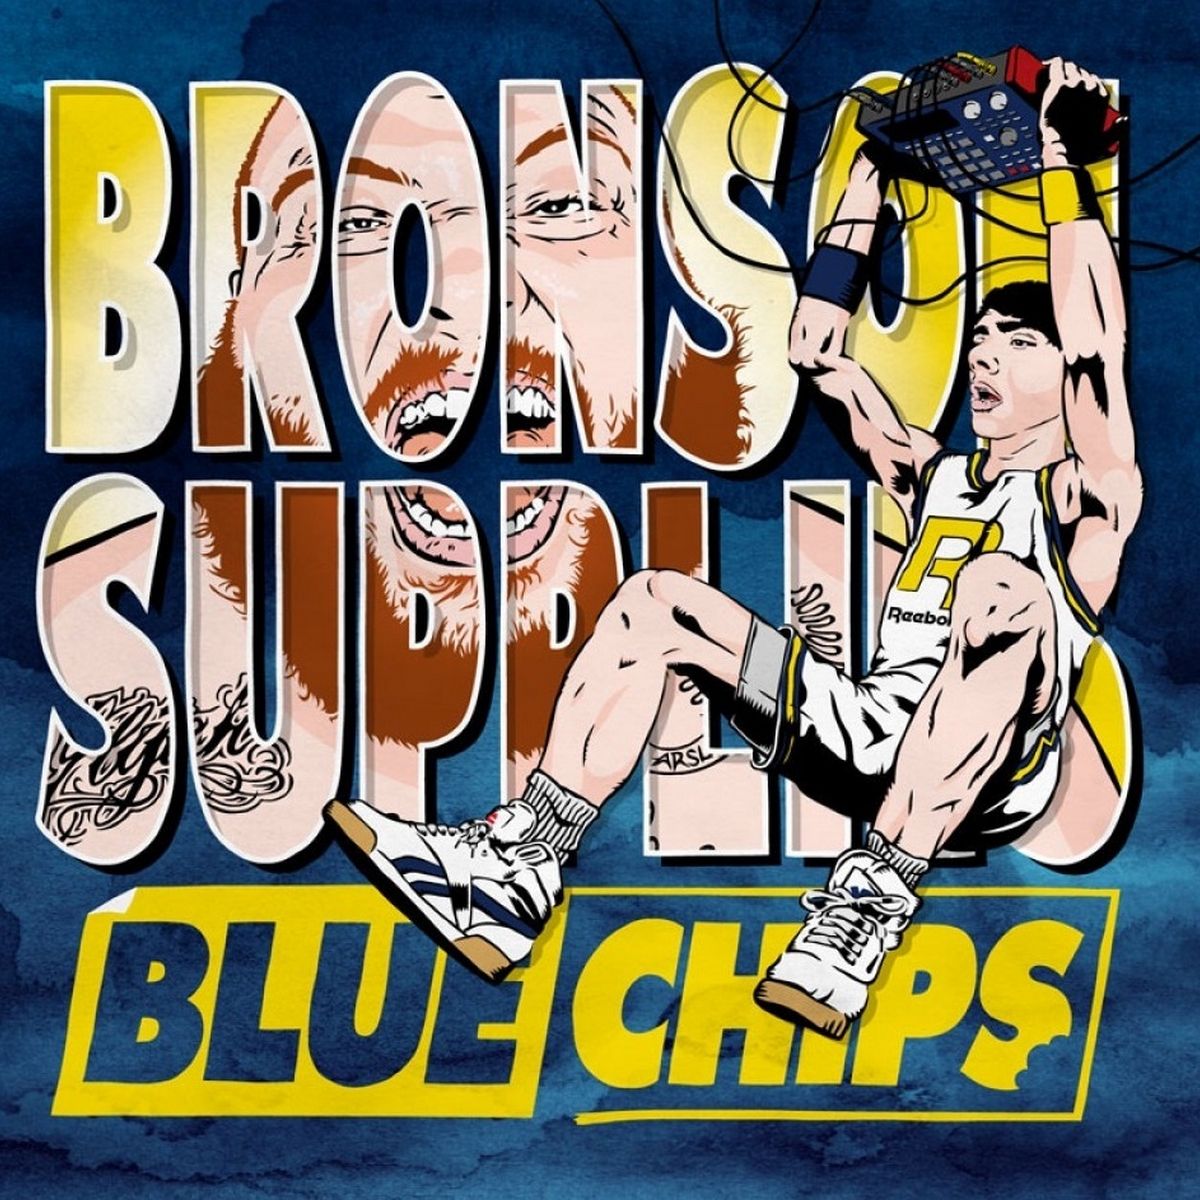 Action Bronson &amp; Party Supplies, &#x27;Blue Chips&#x27; (2012)